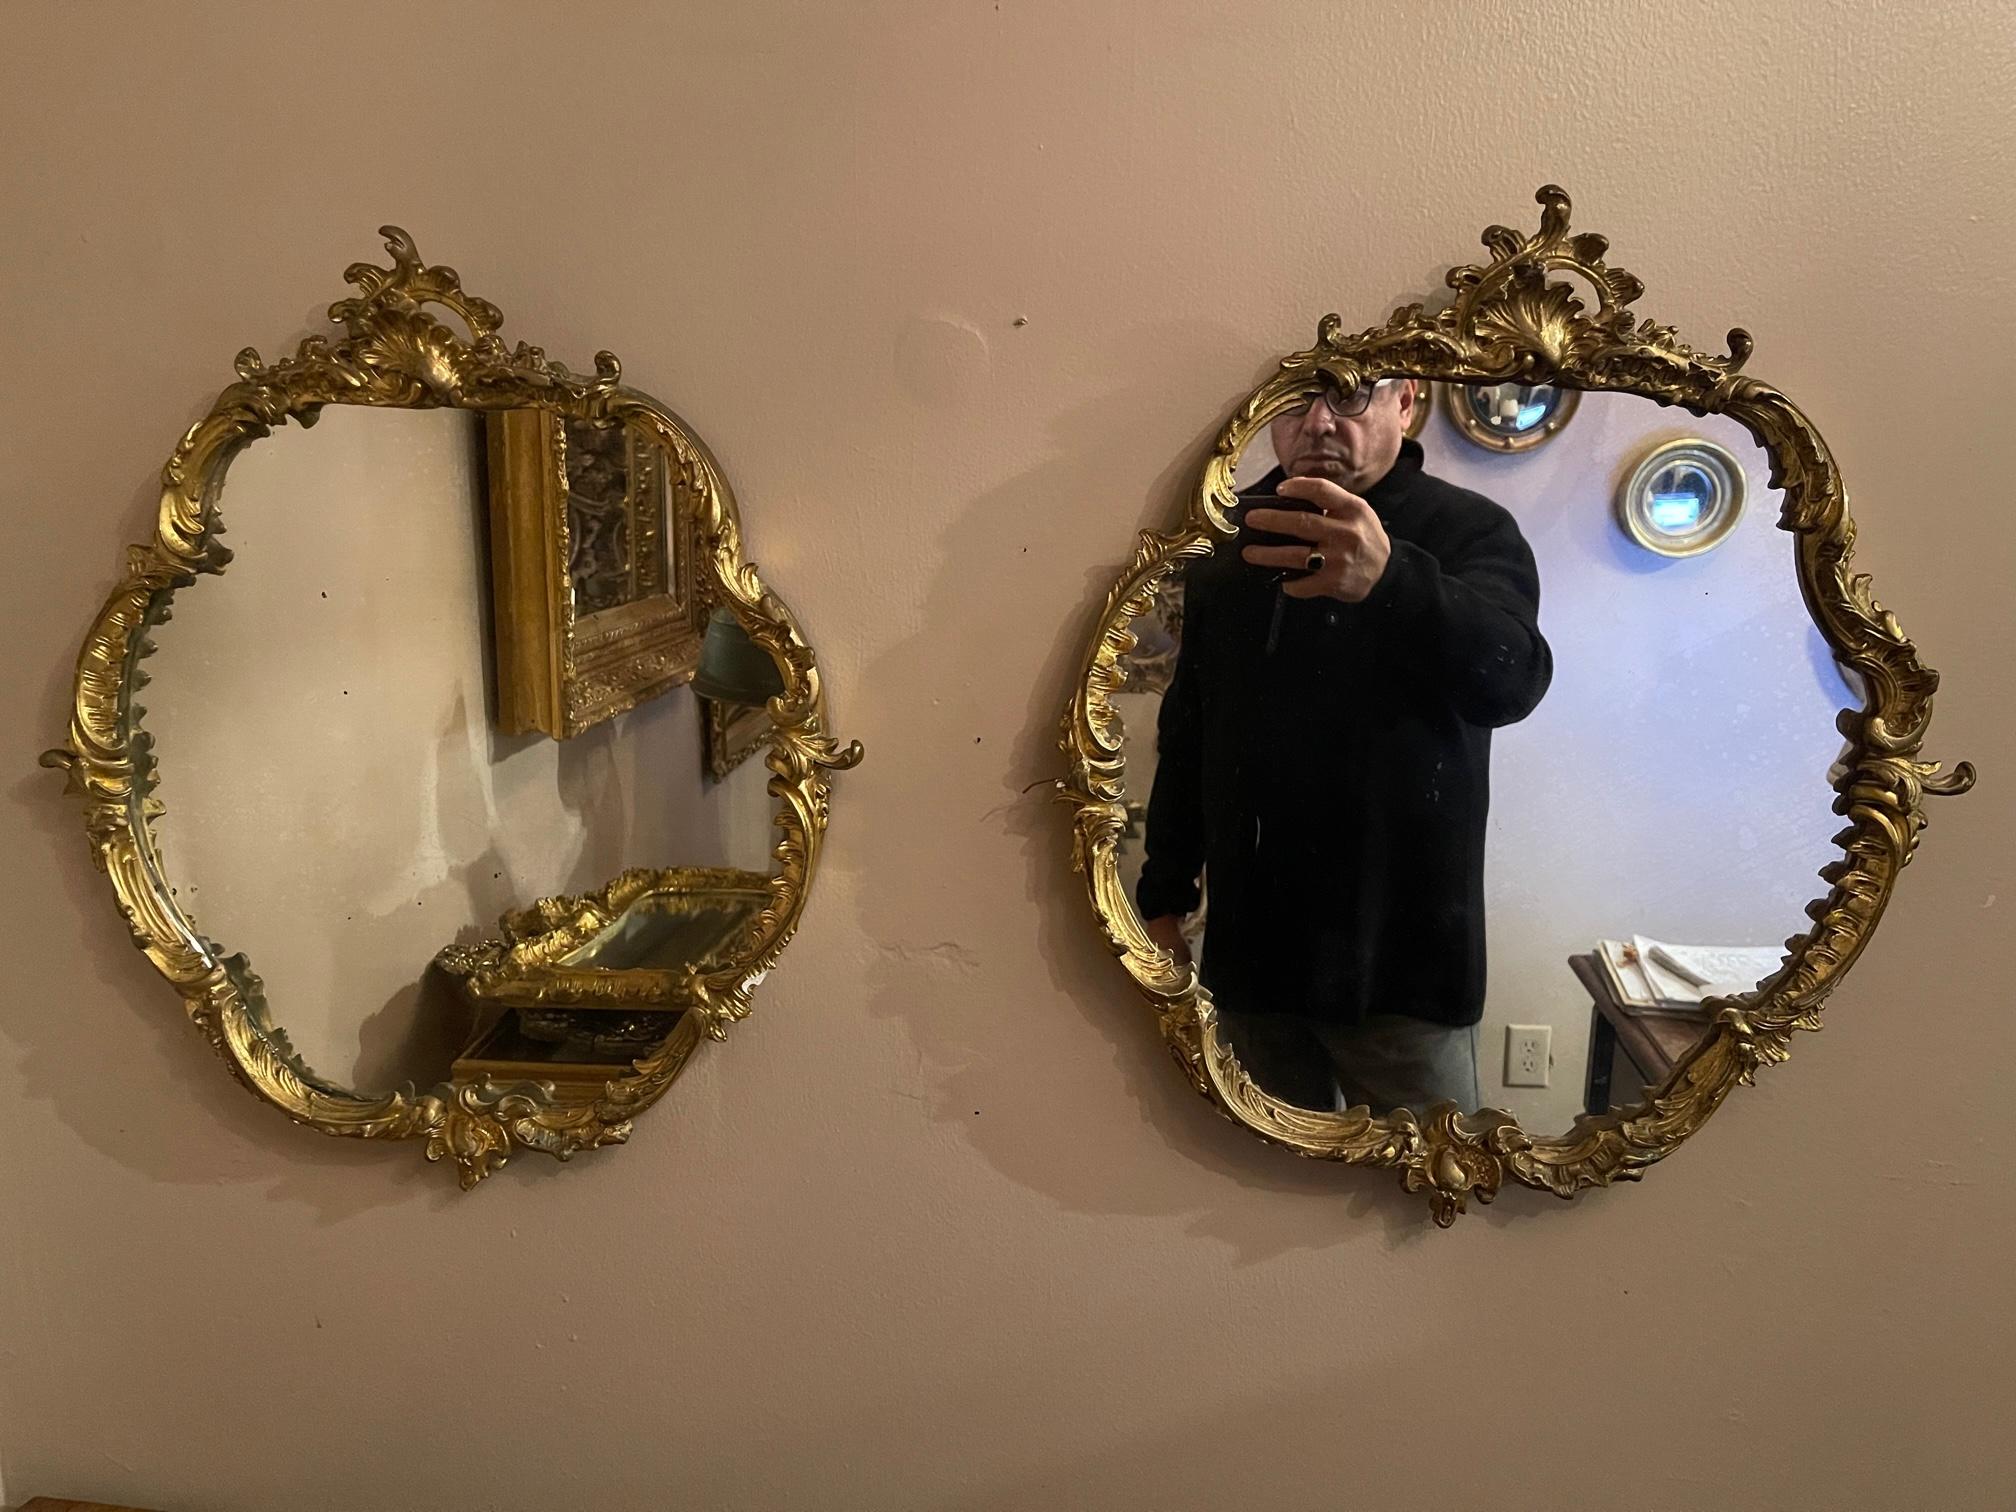 Pair of French Louis XV style carved & gilded rounded mirrors, 19th century.